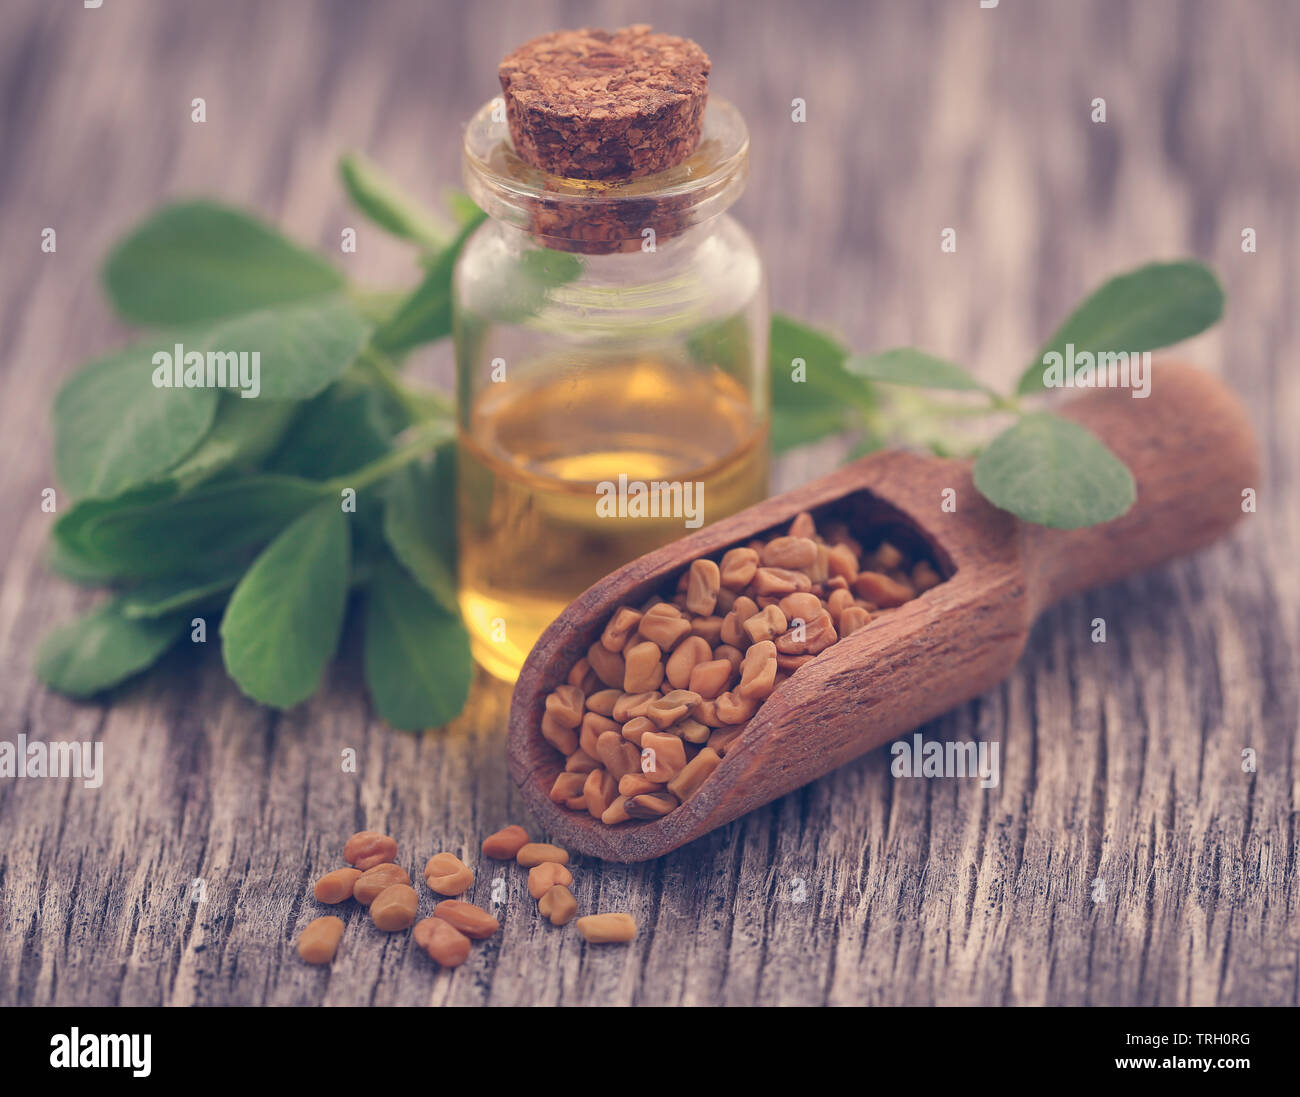 Fenugreek seeds with oil in bottle on wooden background Stock Photo